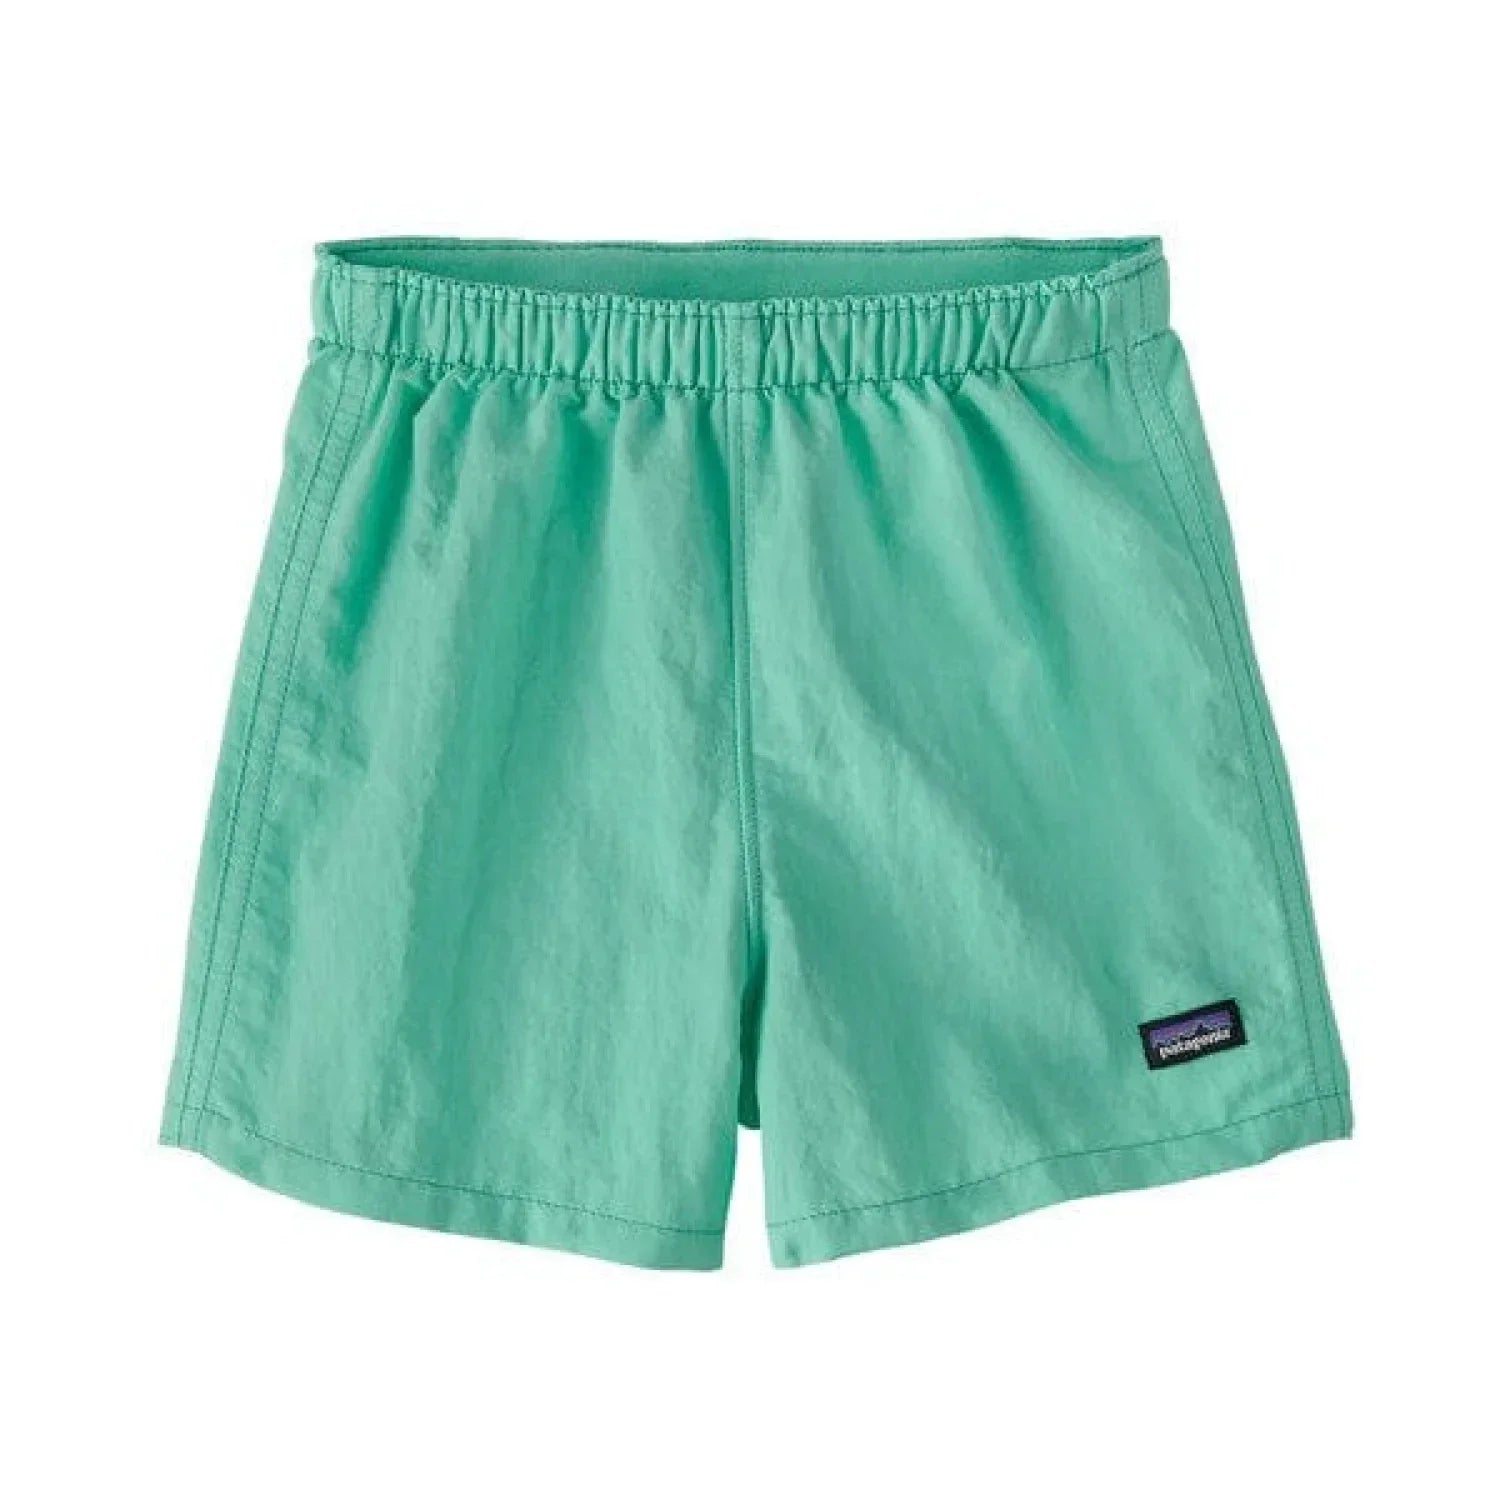 Patagonia 03. KIDS|BABY - BABY - BABY BOTTOMS Baby Baggies Short ELYT EARLY TEAL